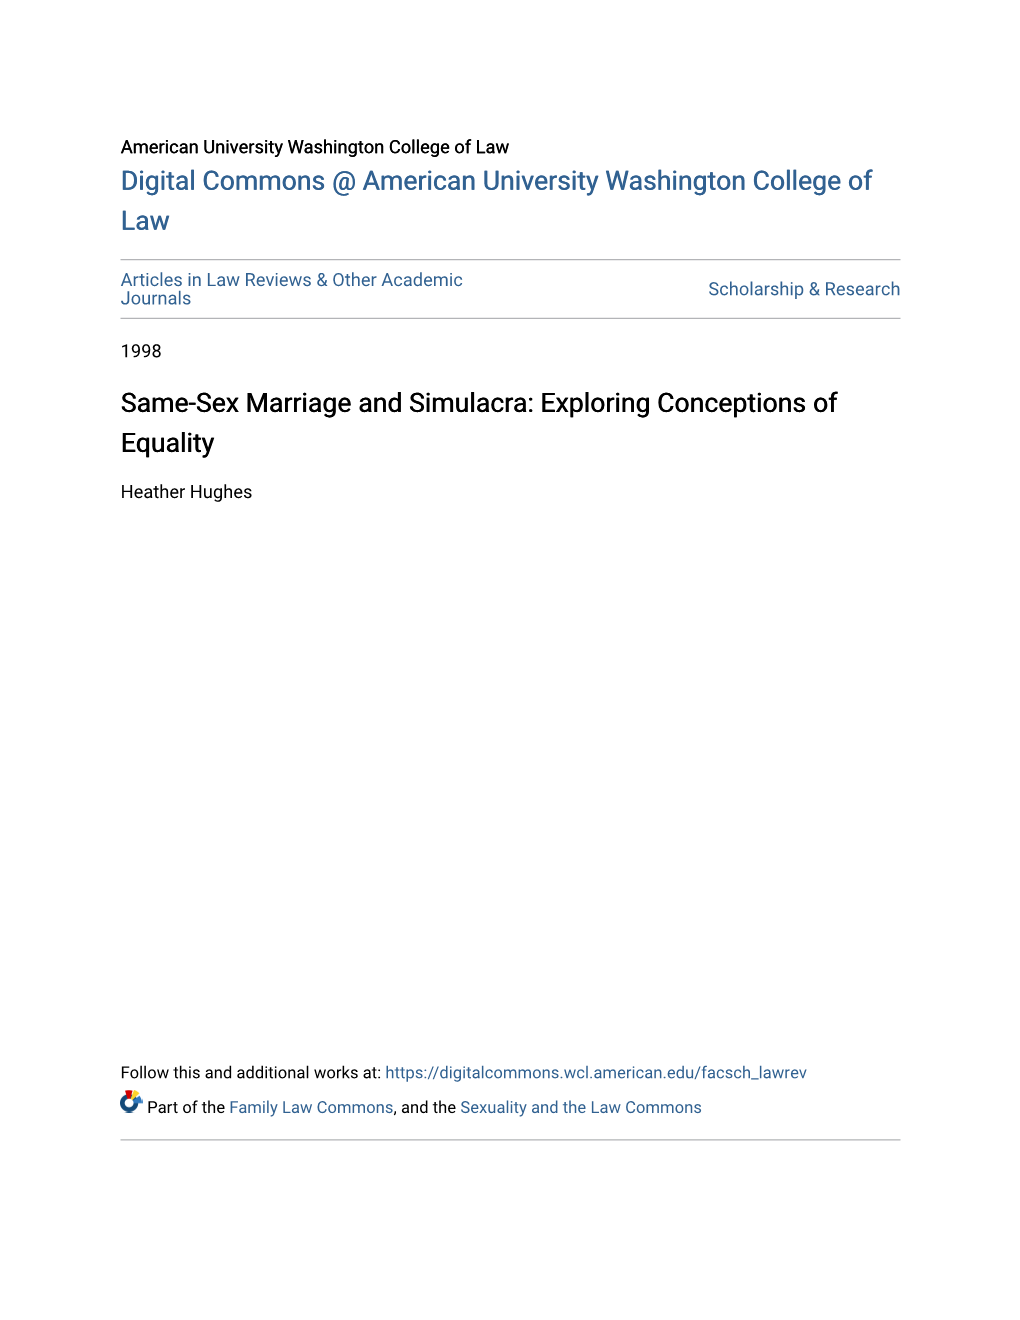 Same-Sex Marriage and Simulacra: Exploring Conceptions of Equality